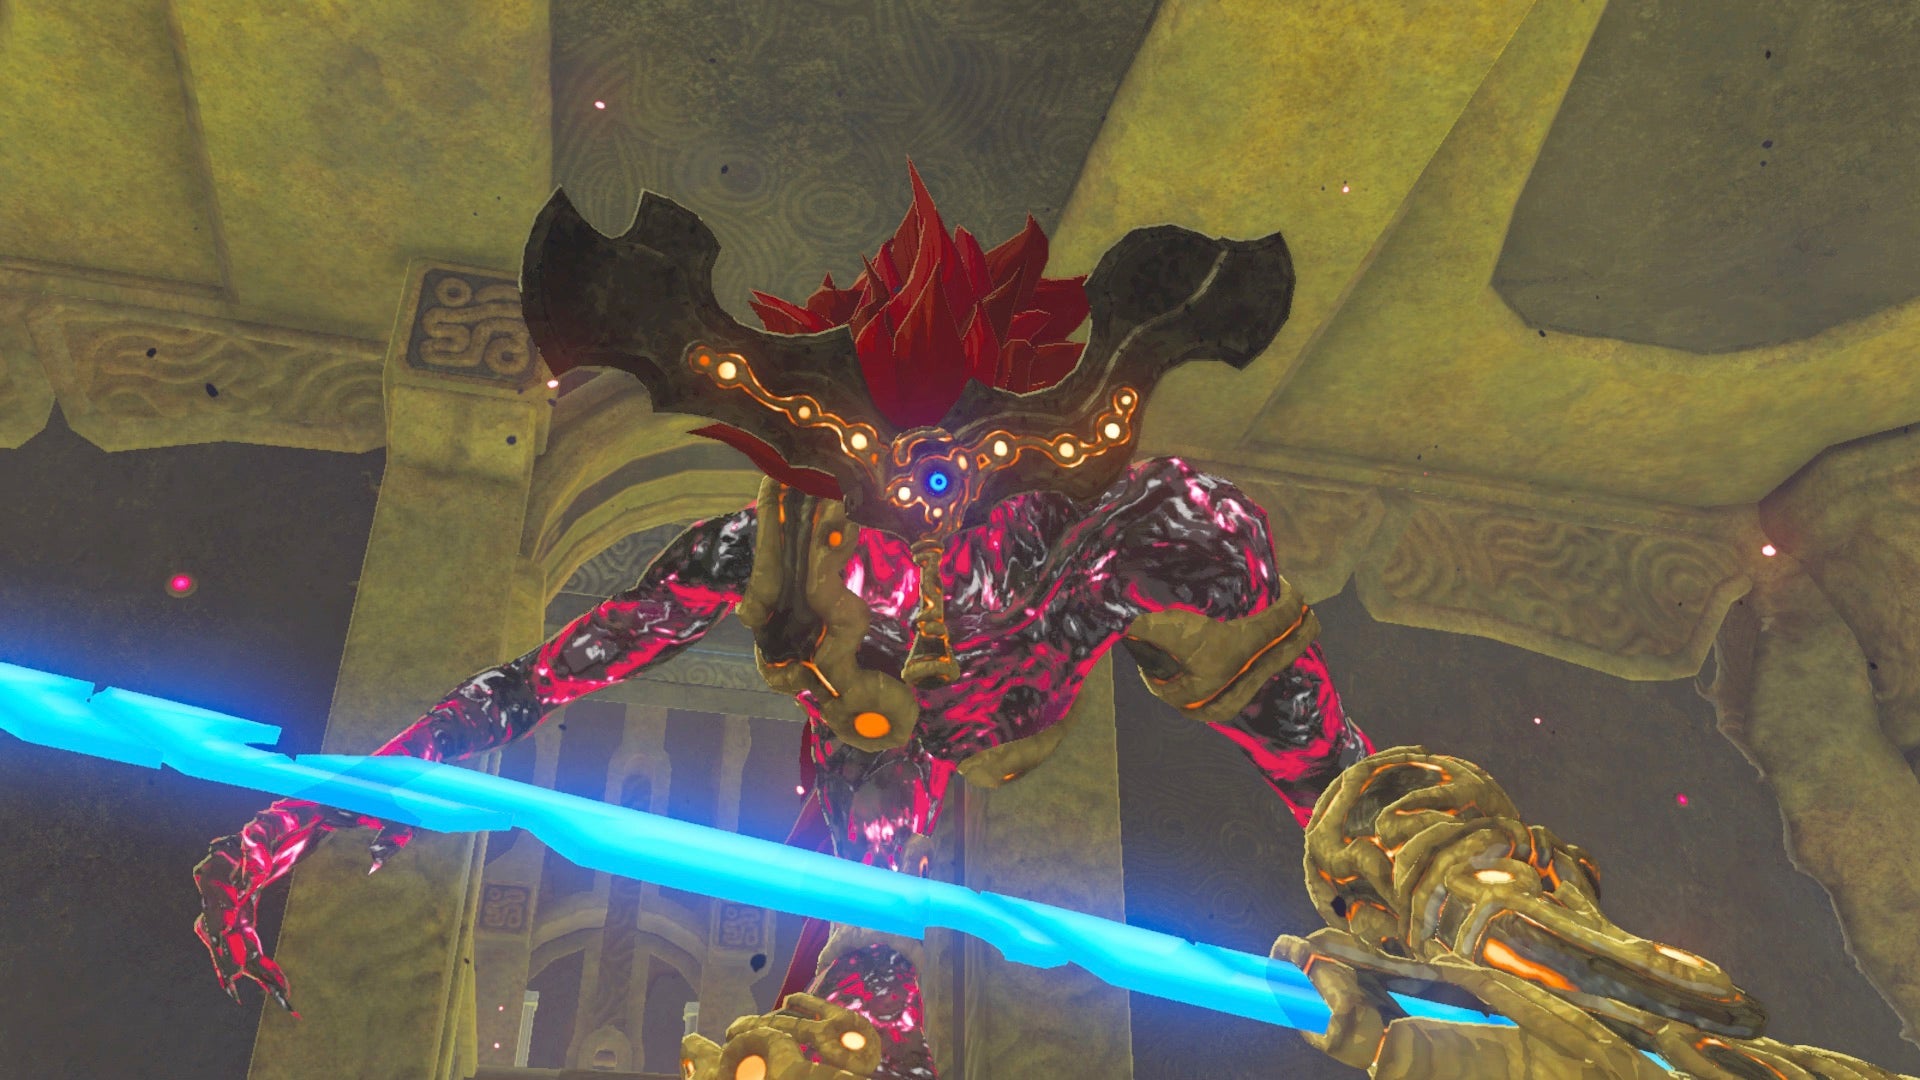 Zelda: Breath the Wild - Waterblight Ganon boss fight strategy and how to get Mipha's | Eurogamer.net